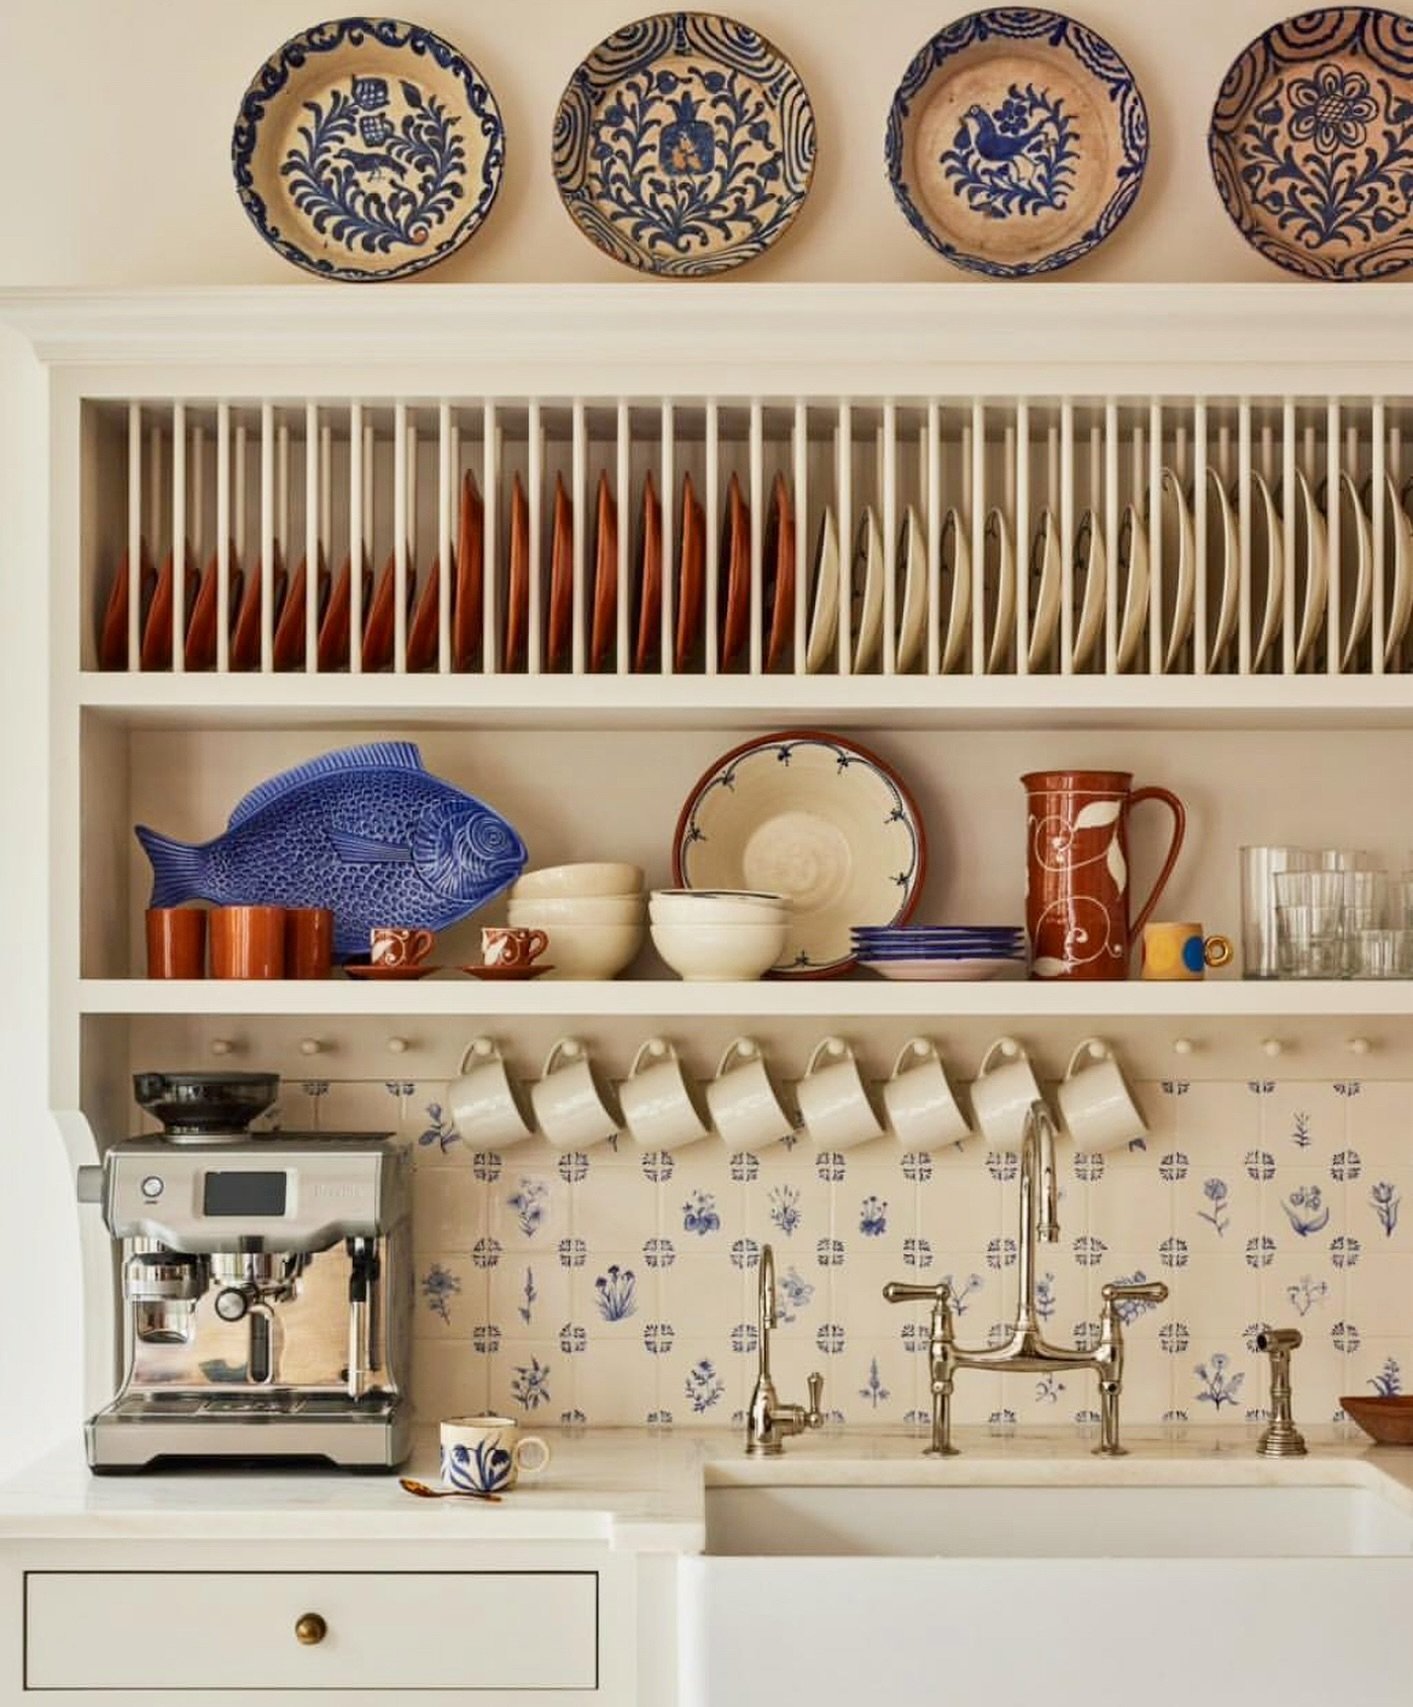 Thank you @scoutandnimble for all the shout outs on our #BPproject20. Love this angle of the sink cabinet 🤍 outfitted with lots of gorgeous plate-ware from our friends from @porta_nyc 💙